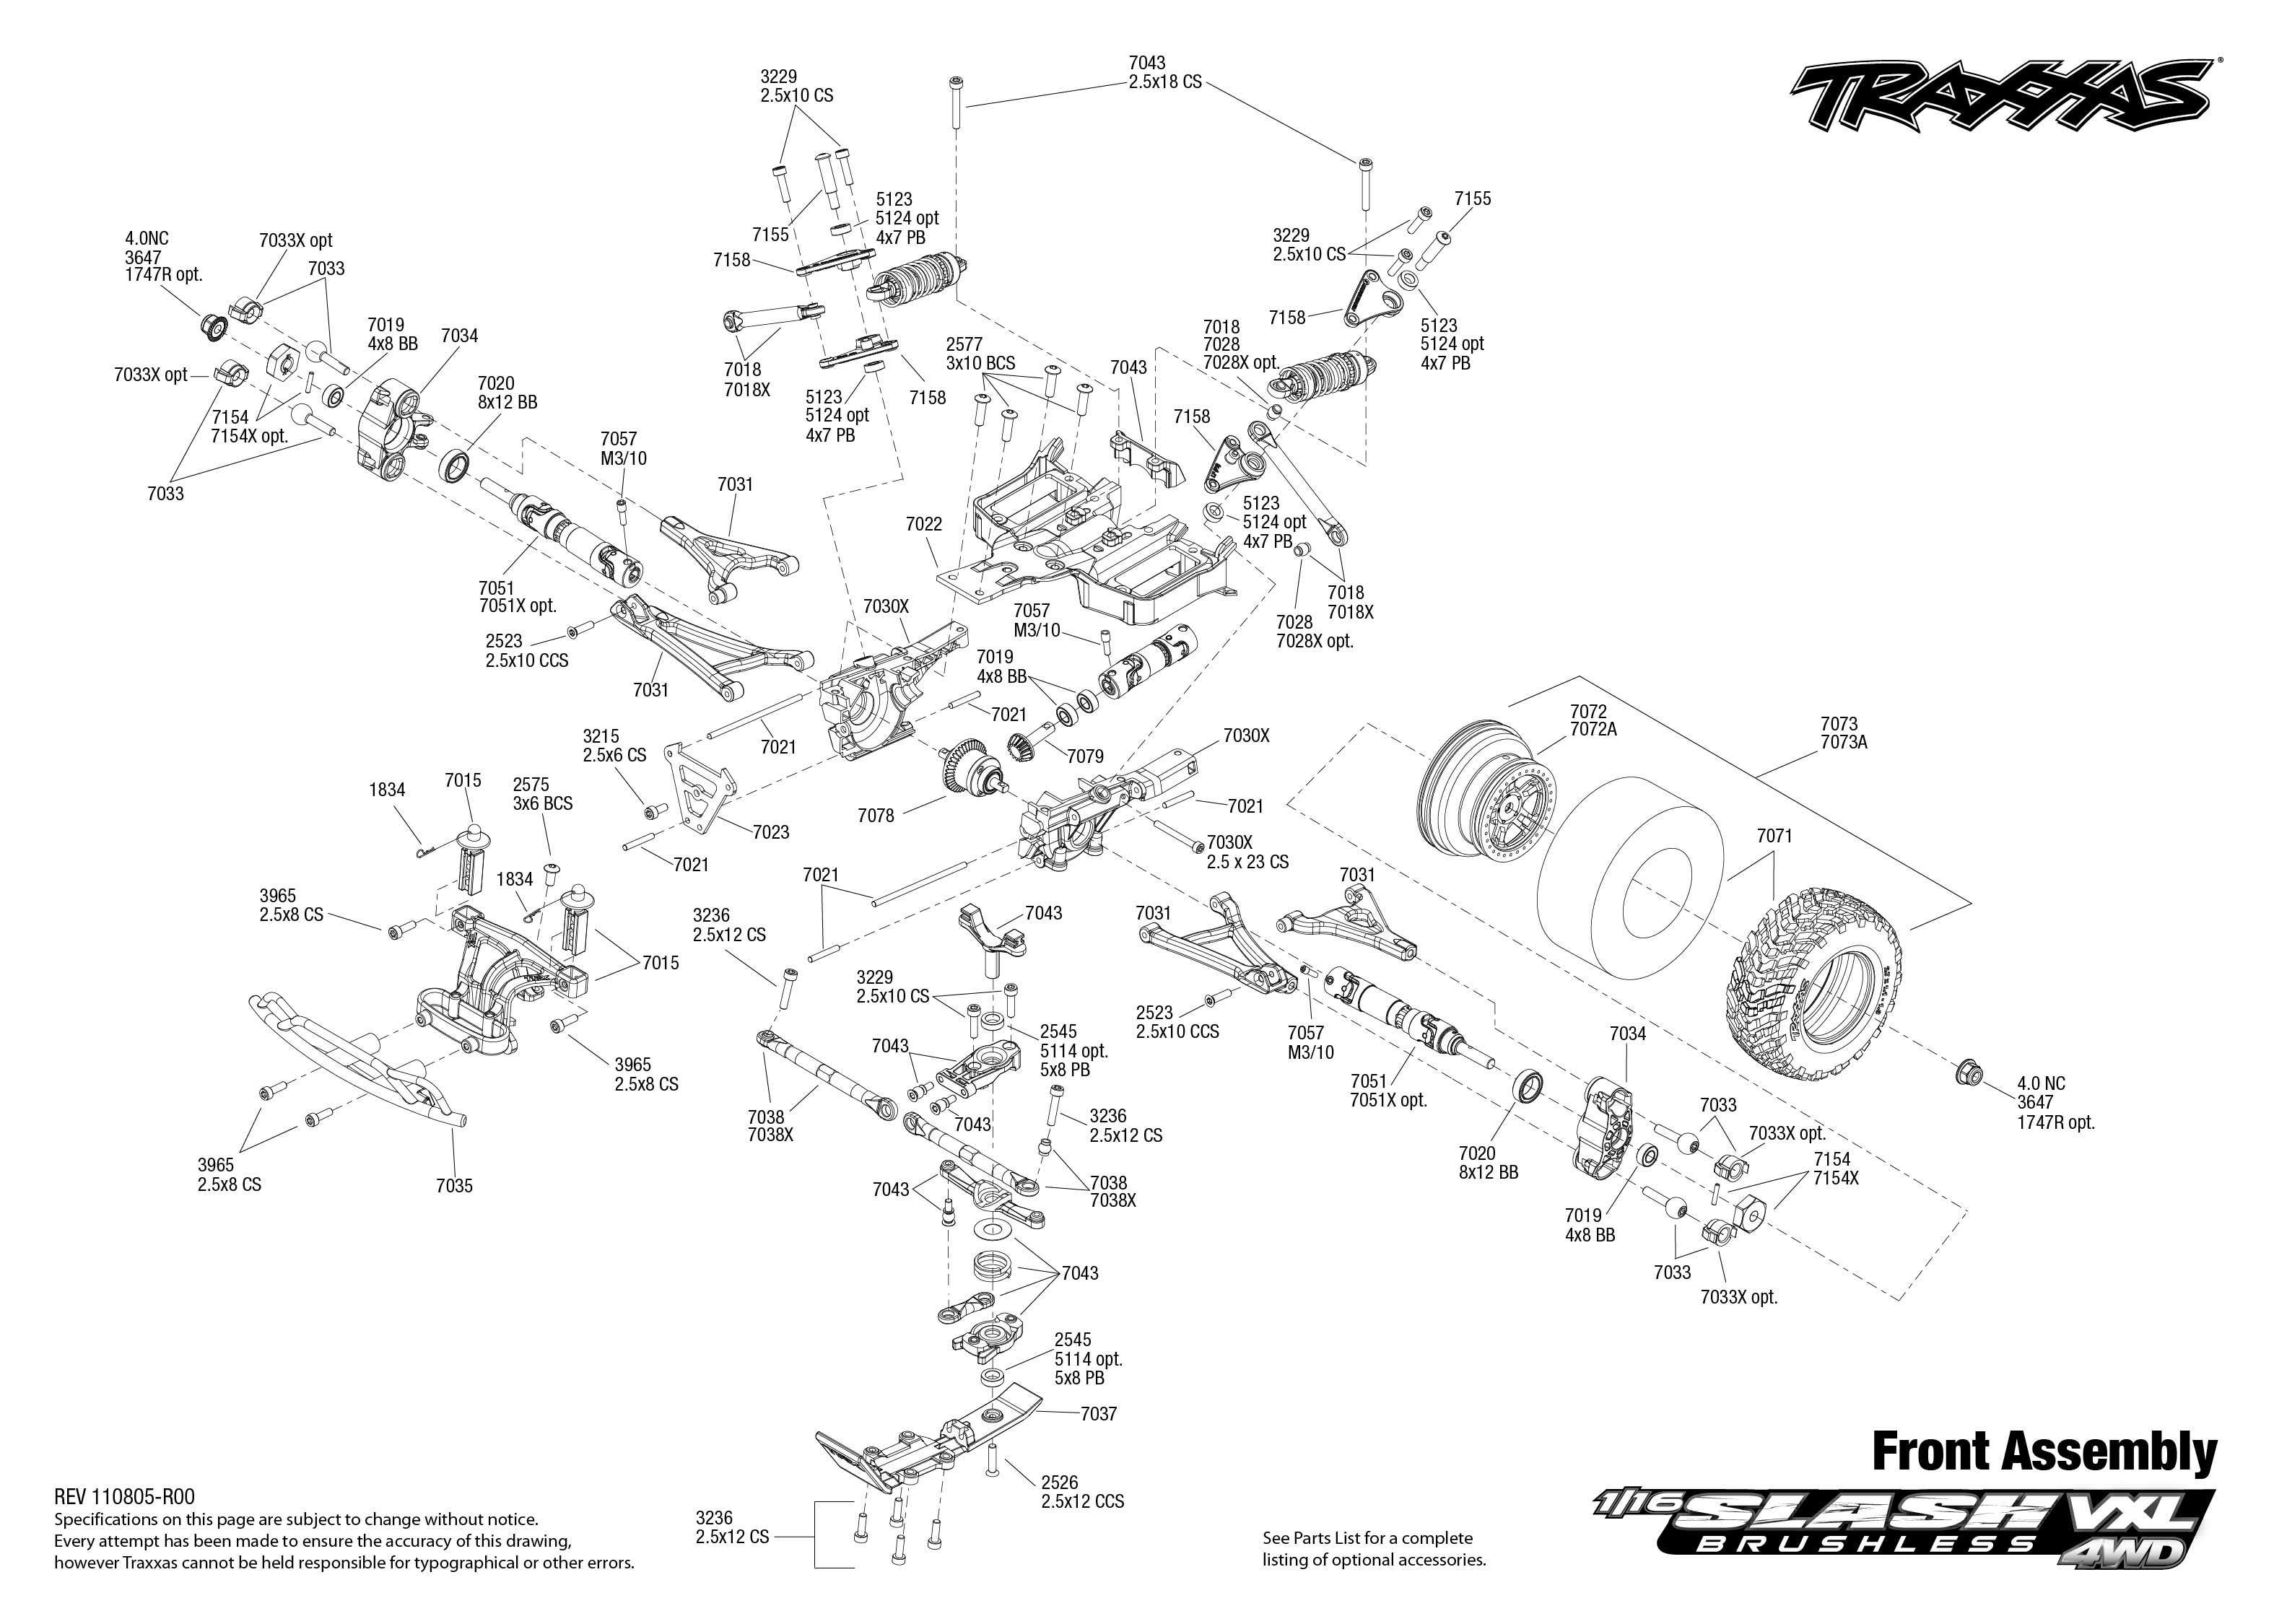 Traxxas stampede parts manual